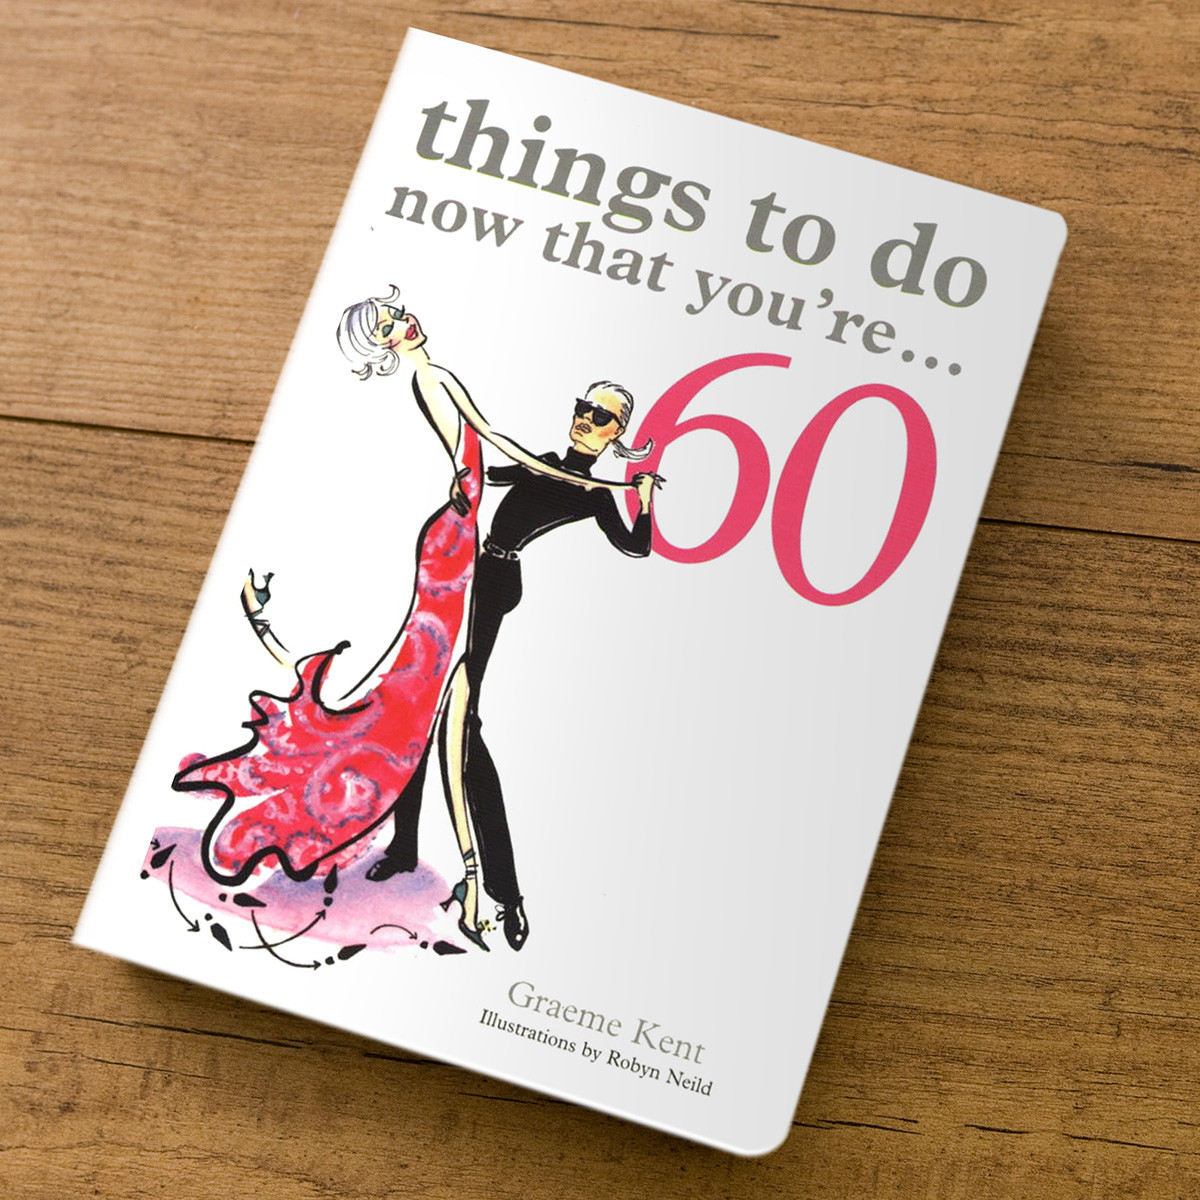 60th Birthday Gifts For Him
 Things To Do Now That You re 60 Gift Book 60th